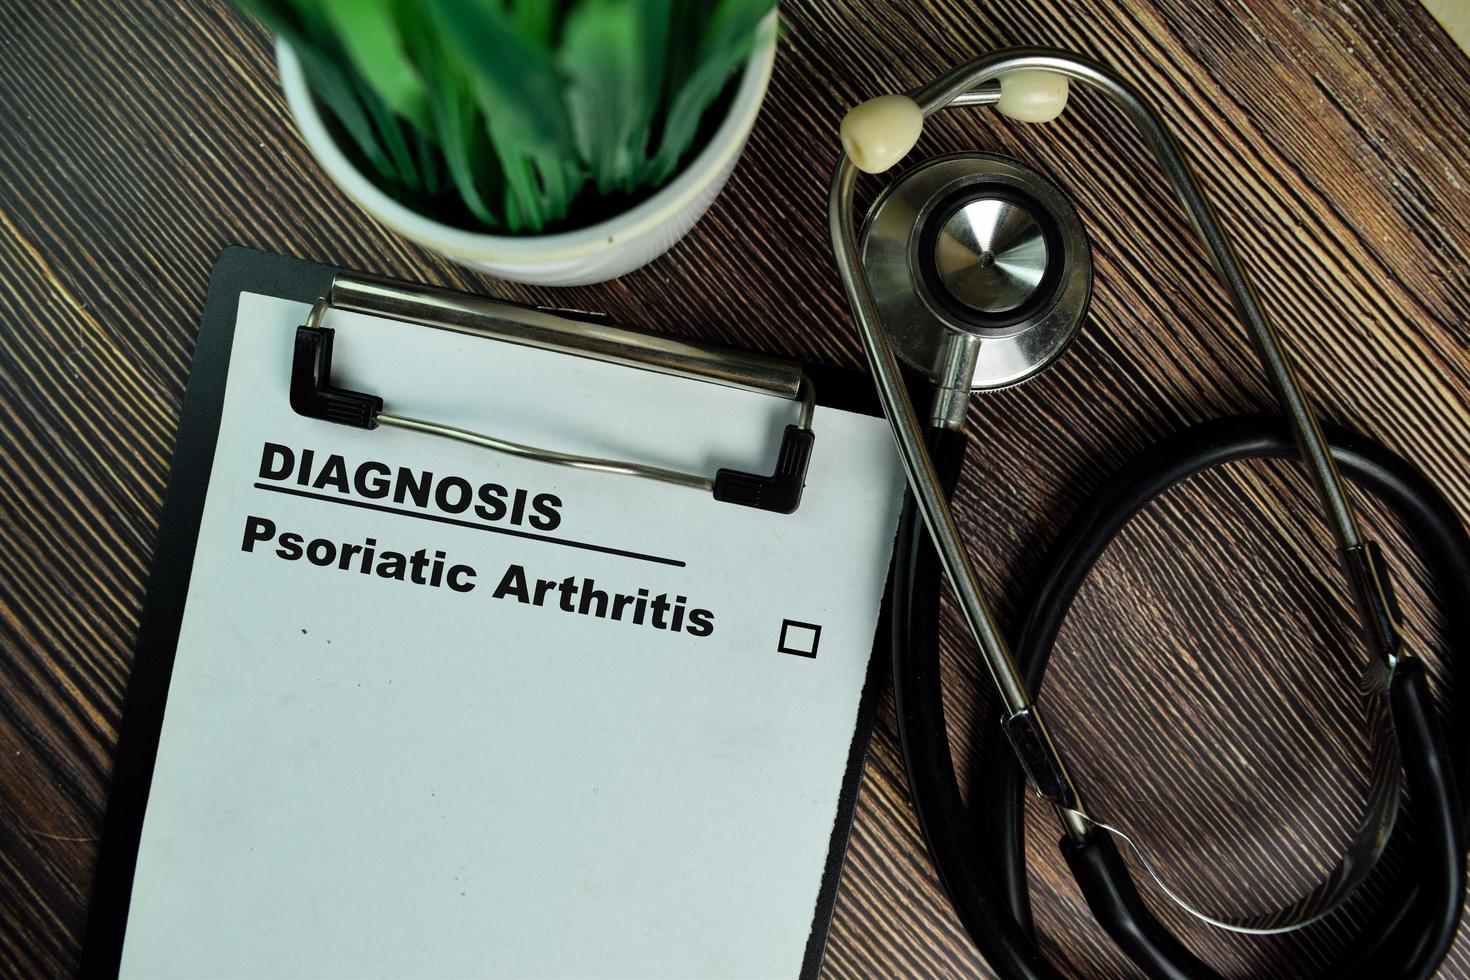 Diagnosis - Psoriatic Arthritis written on paperwork isolated on wooden table photo